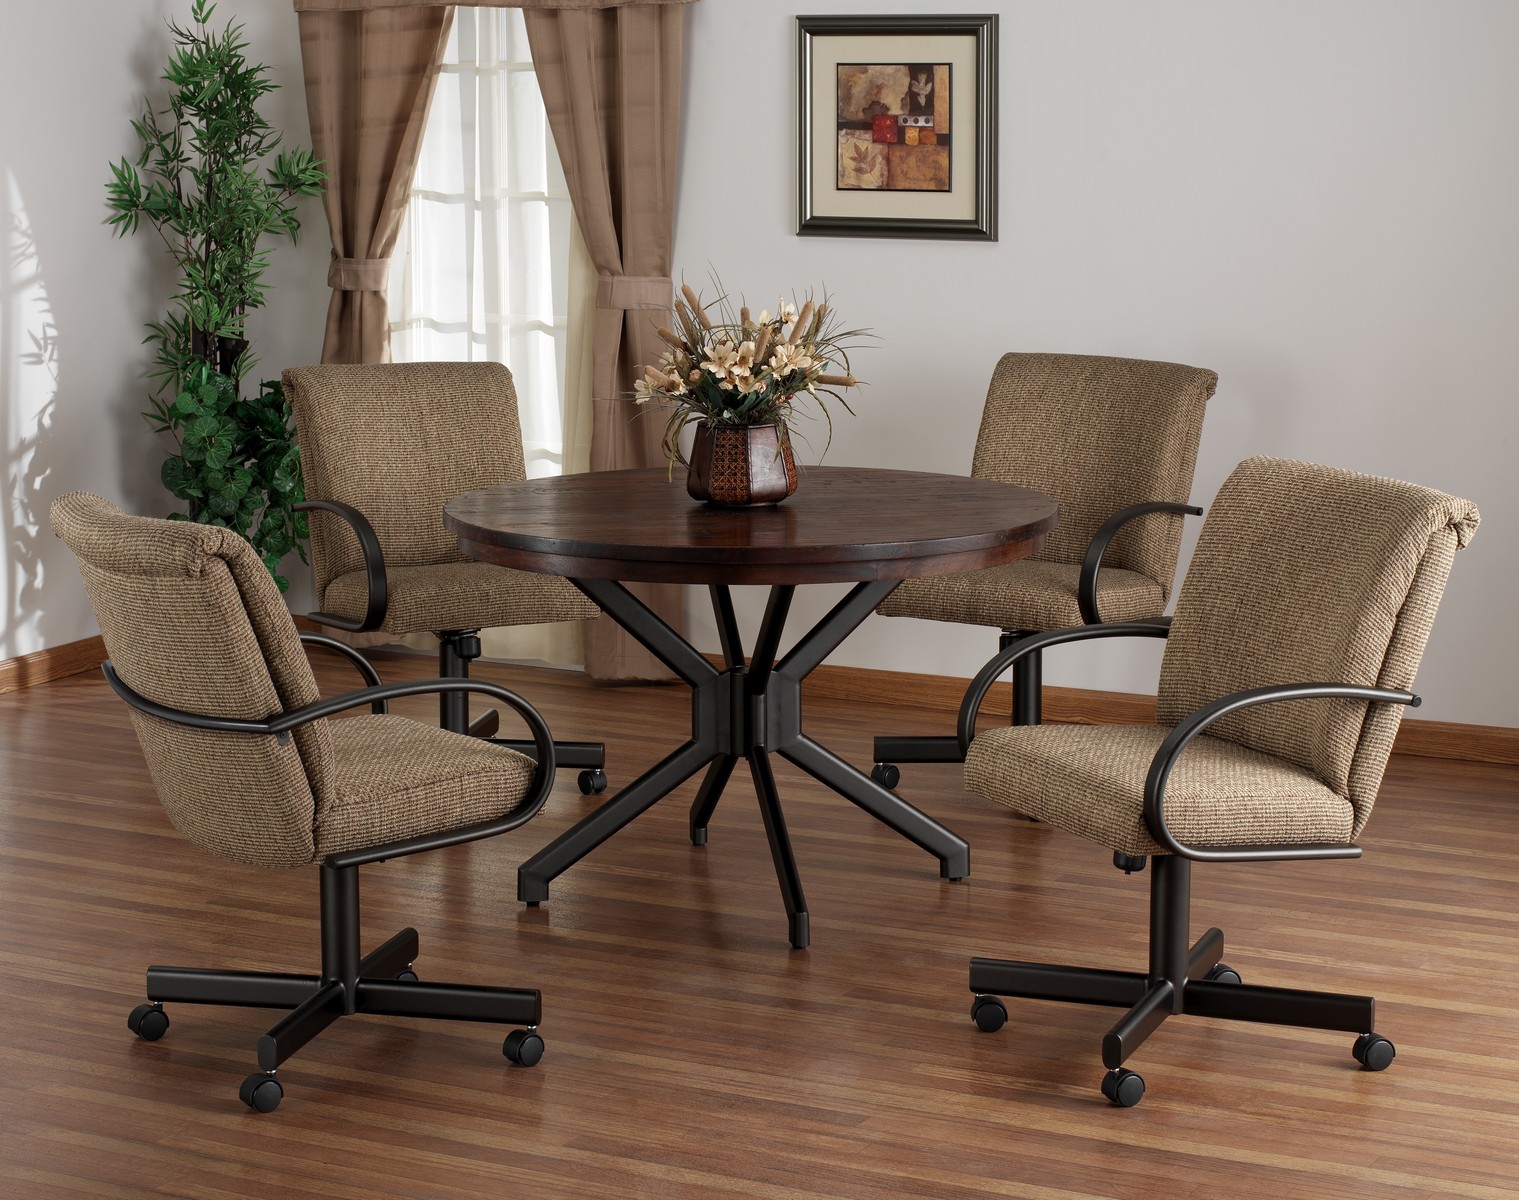 Upholstered Caster Dining Room Chairs